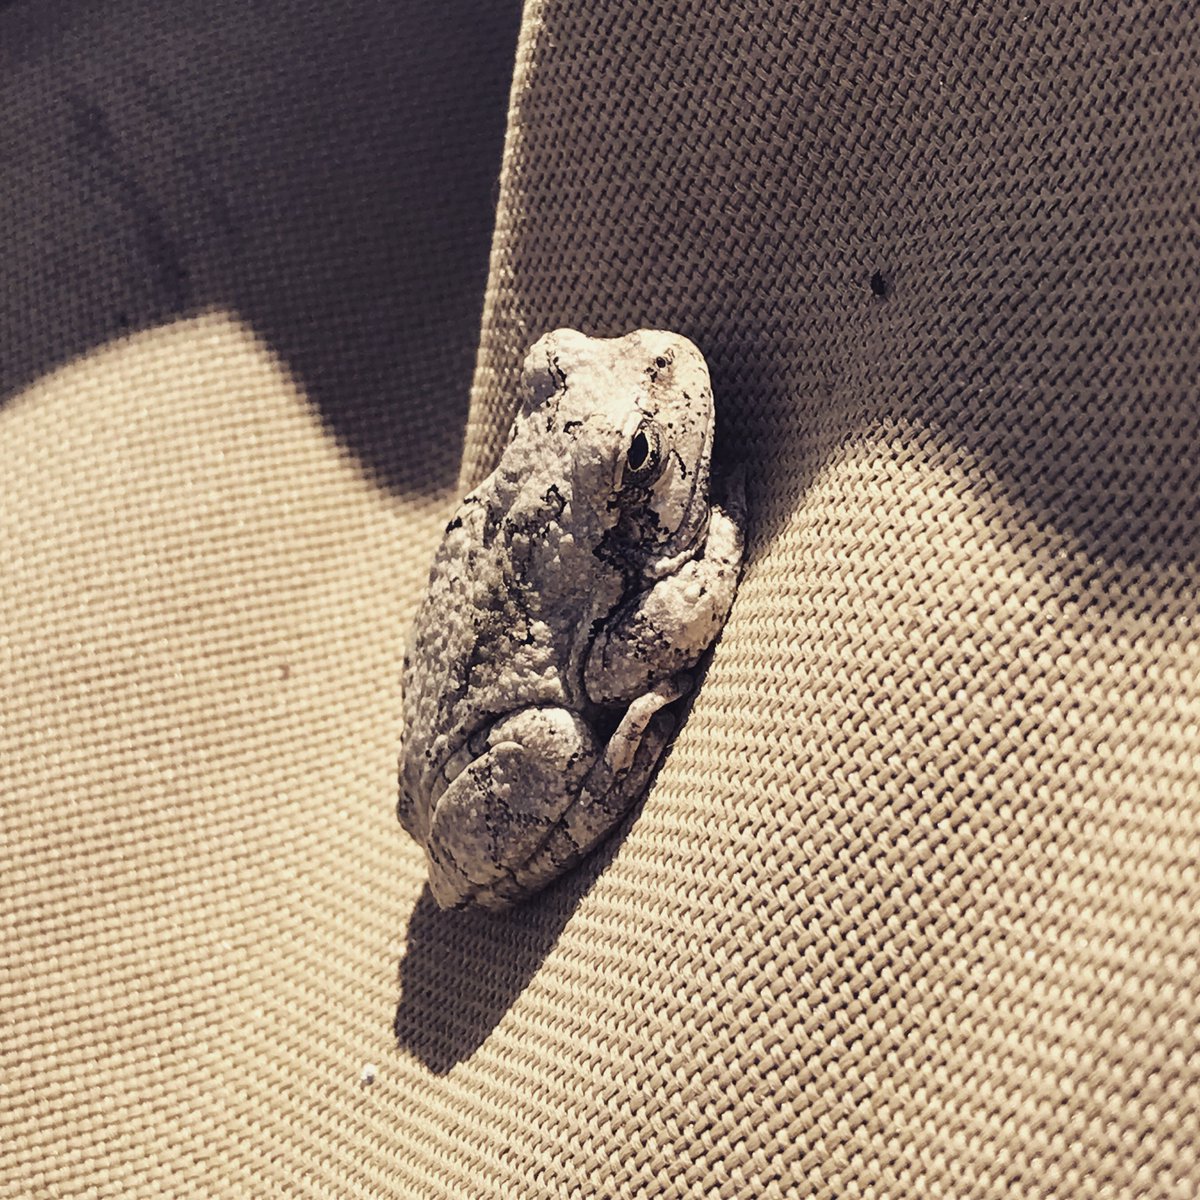 Look who we found today in the camp chair. A gray tree frog! He had even changed colors to blend in! #workingoutside #camouflage